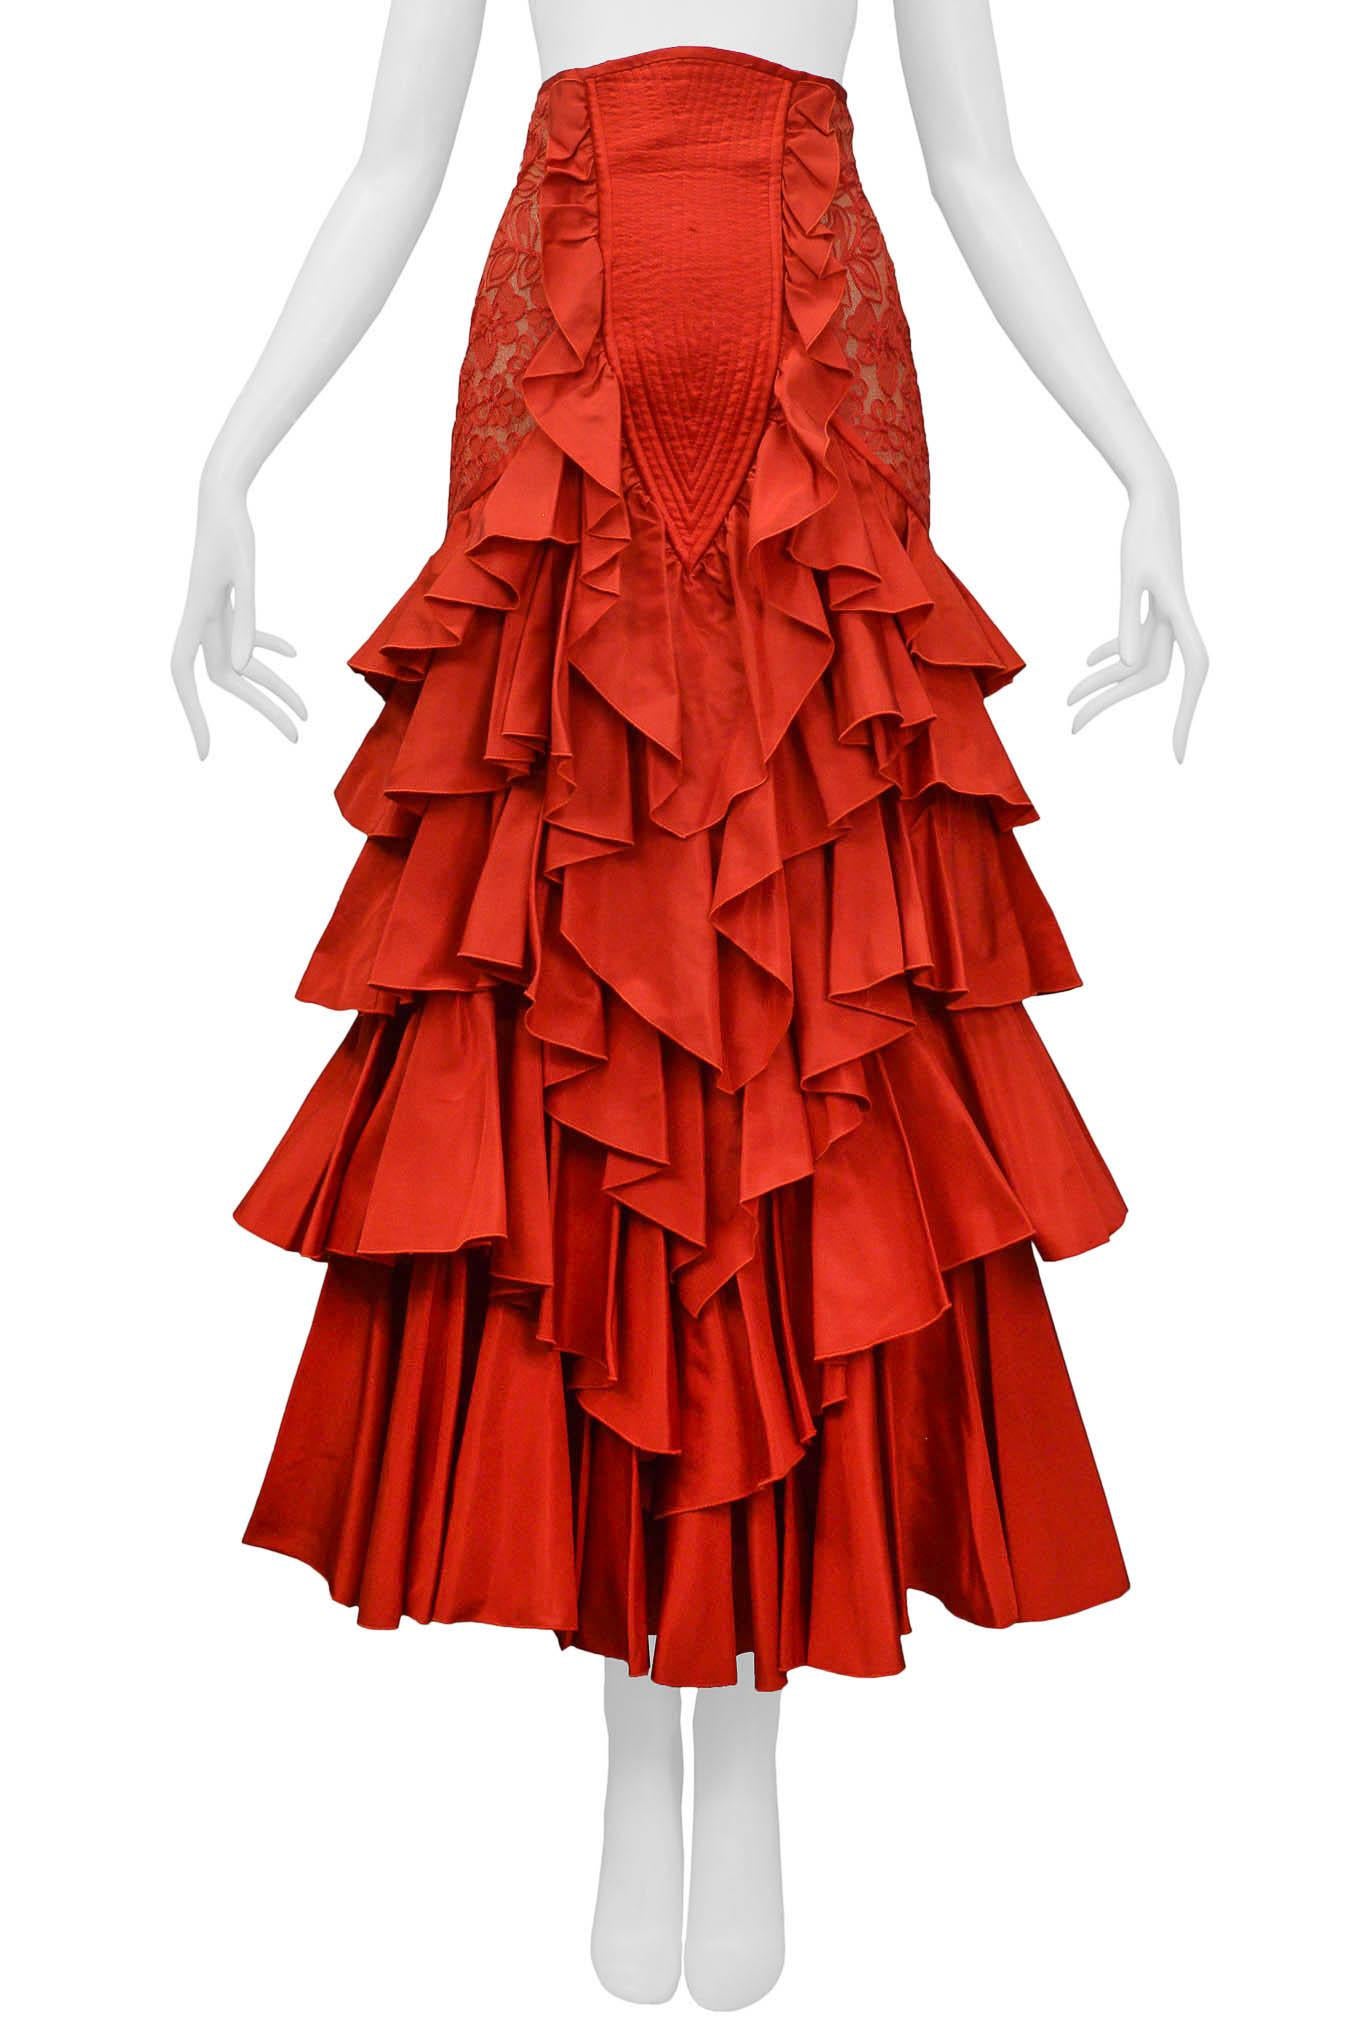 Valentino Red Ruffle Ball Gown Skirt In Excellent Condition In Los Angeles, CA